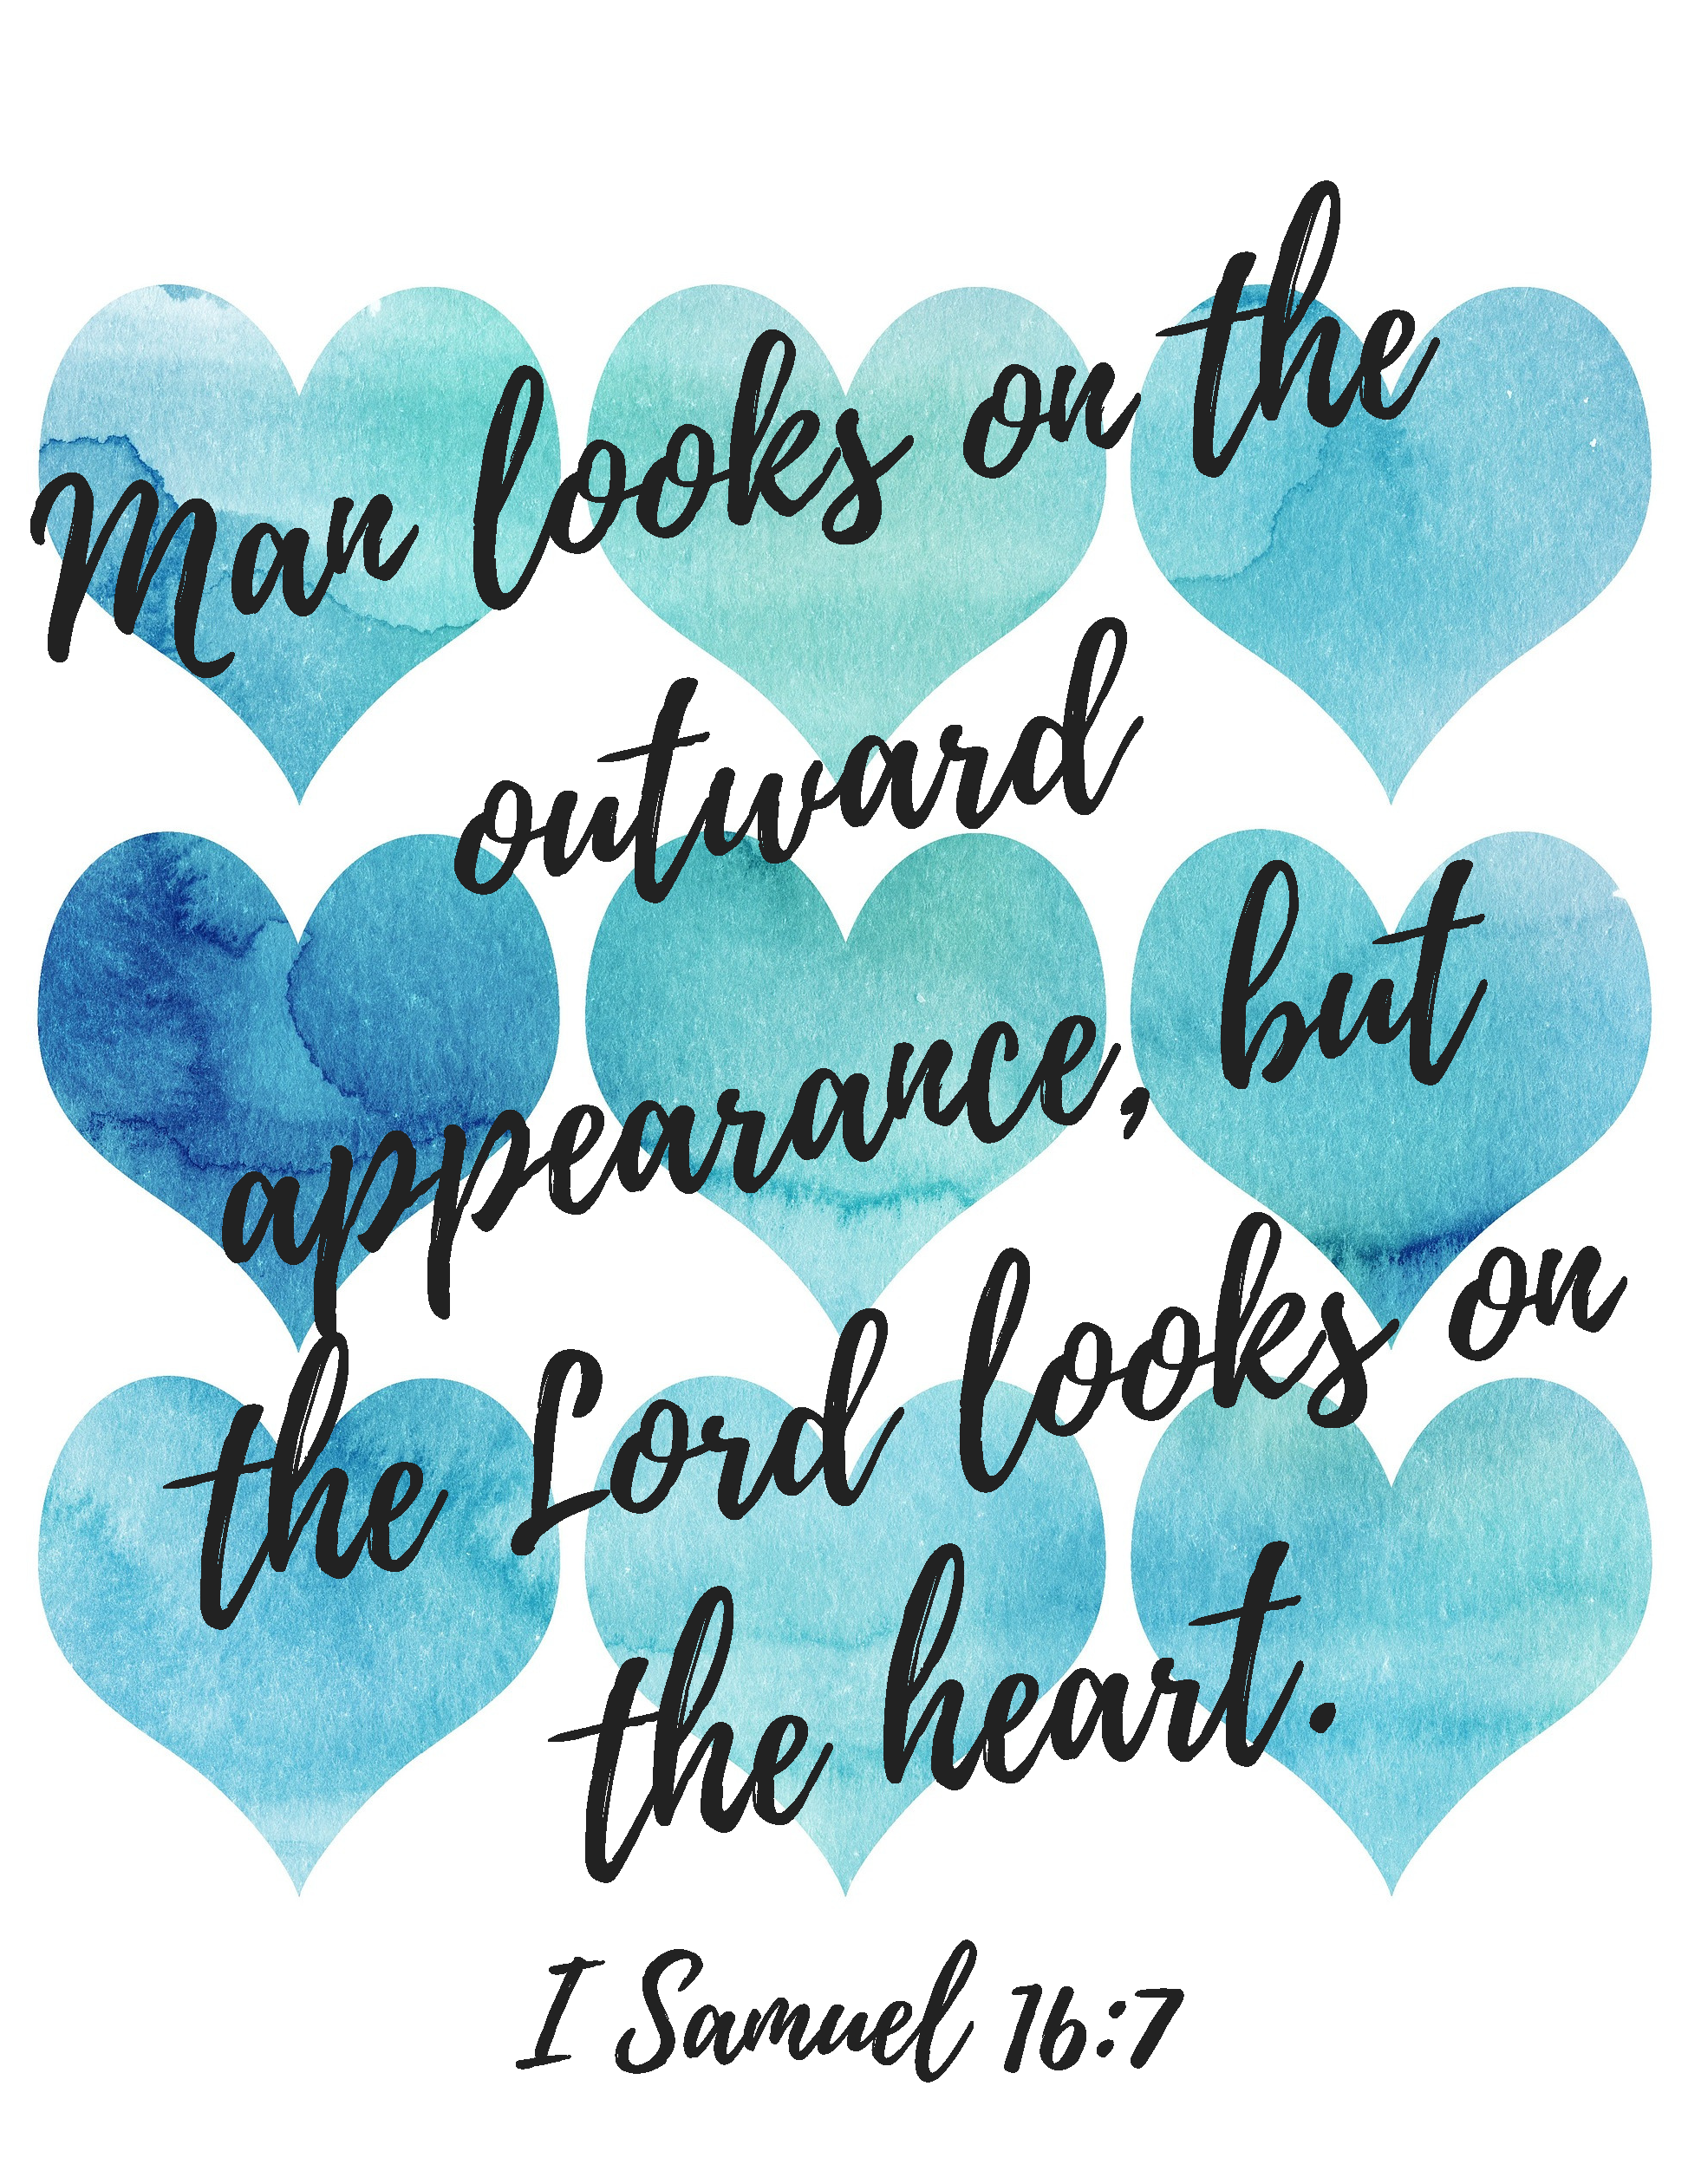 CLS+Lord+looks+on+the+heart+(1).png